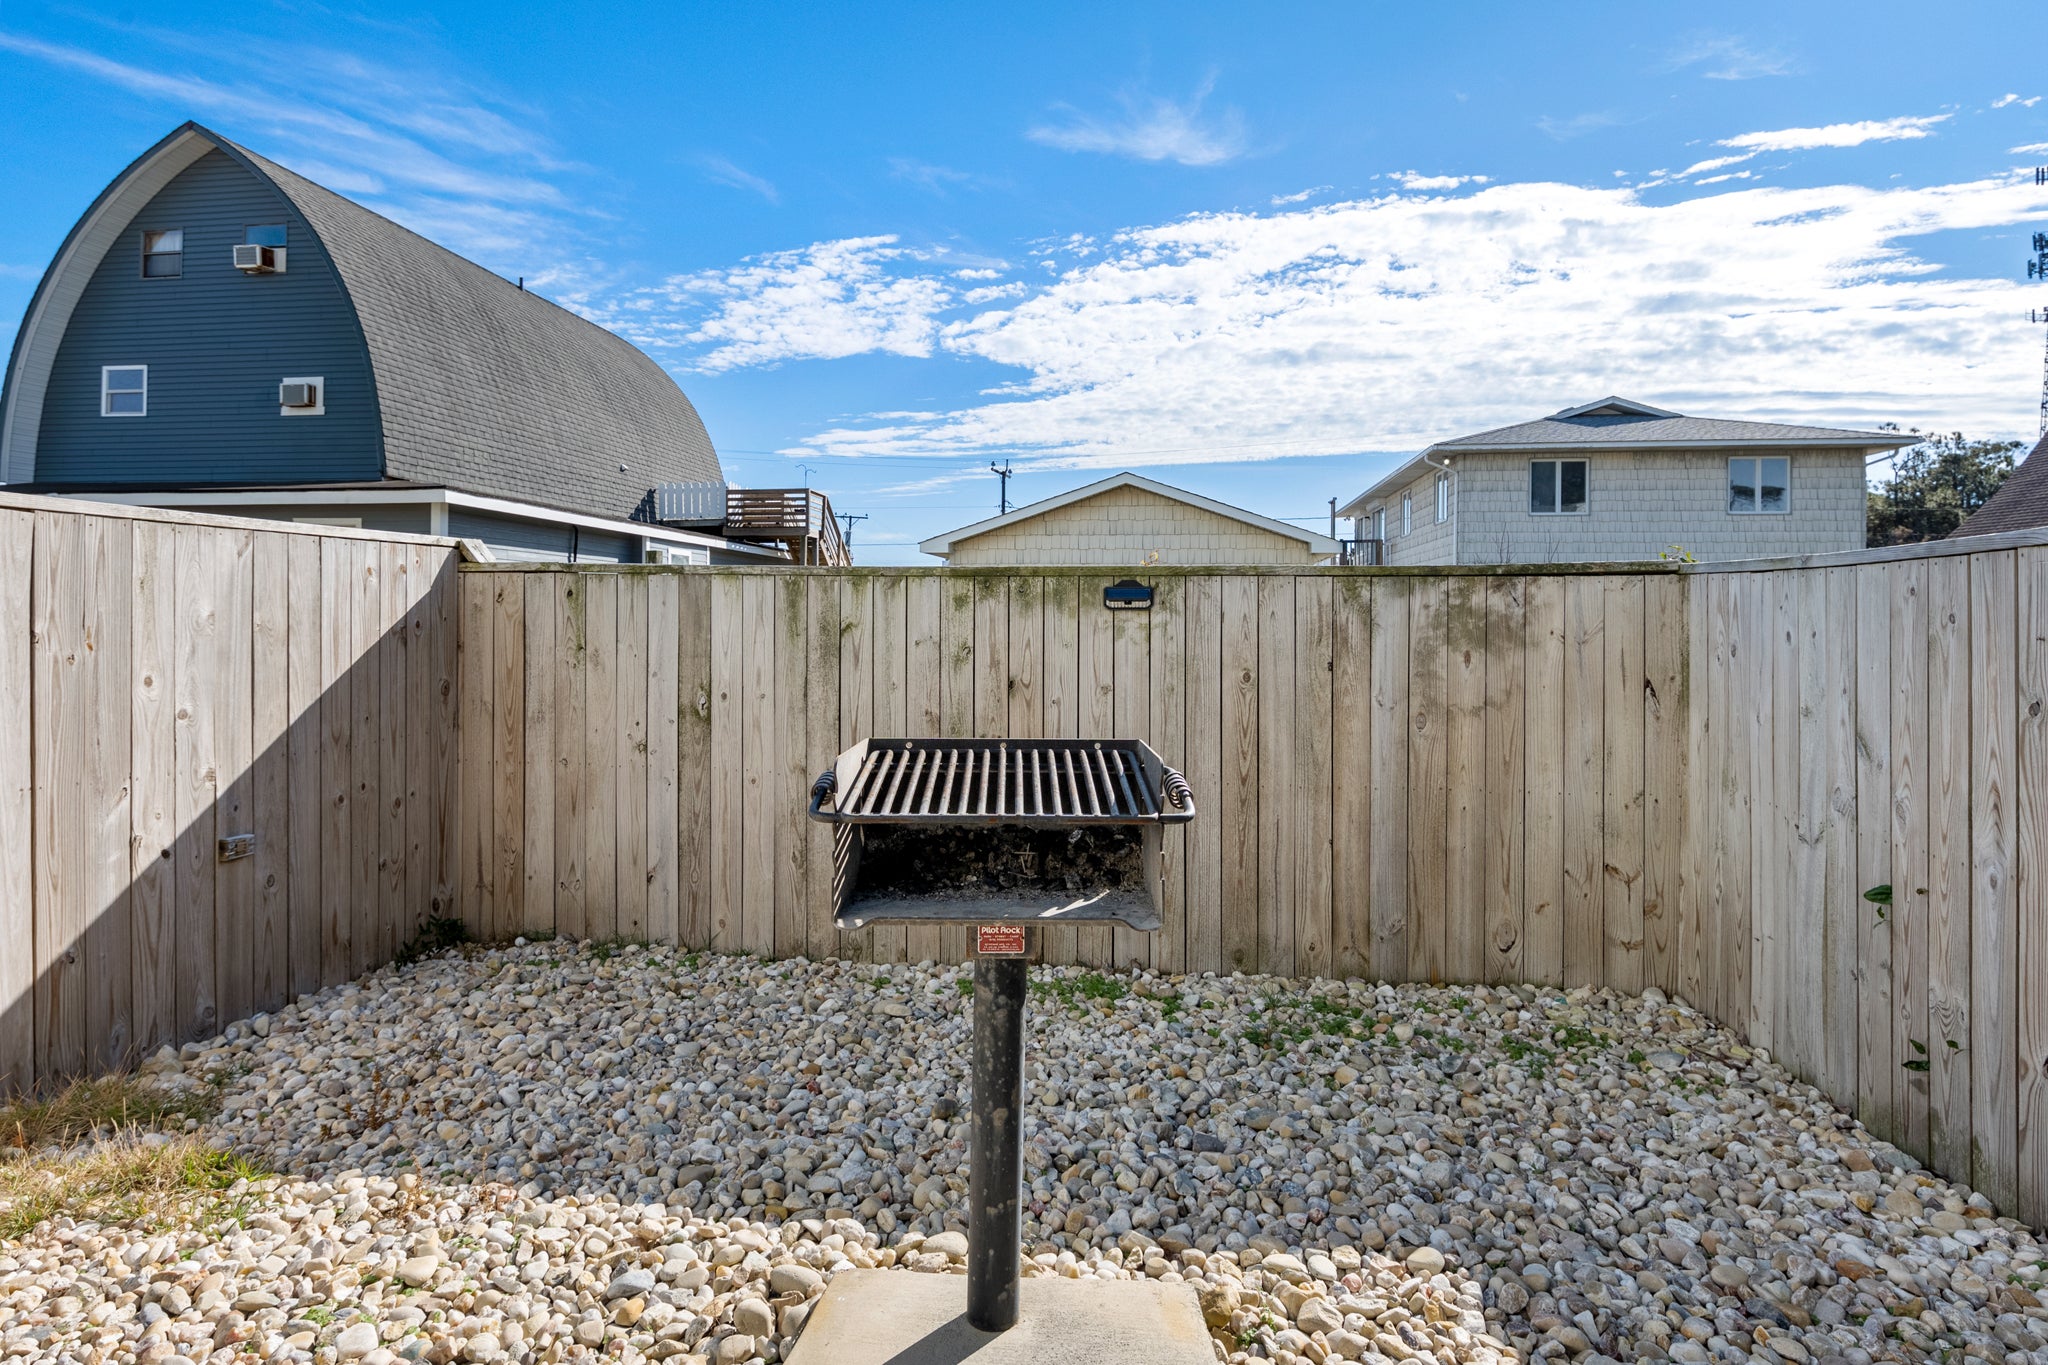 GR3630: Happy Hour | Grilling Area